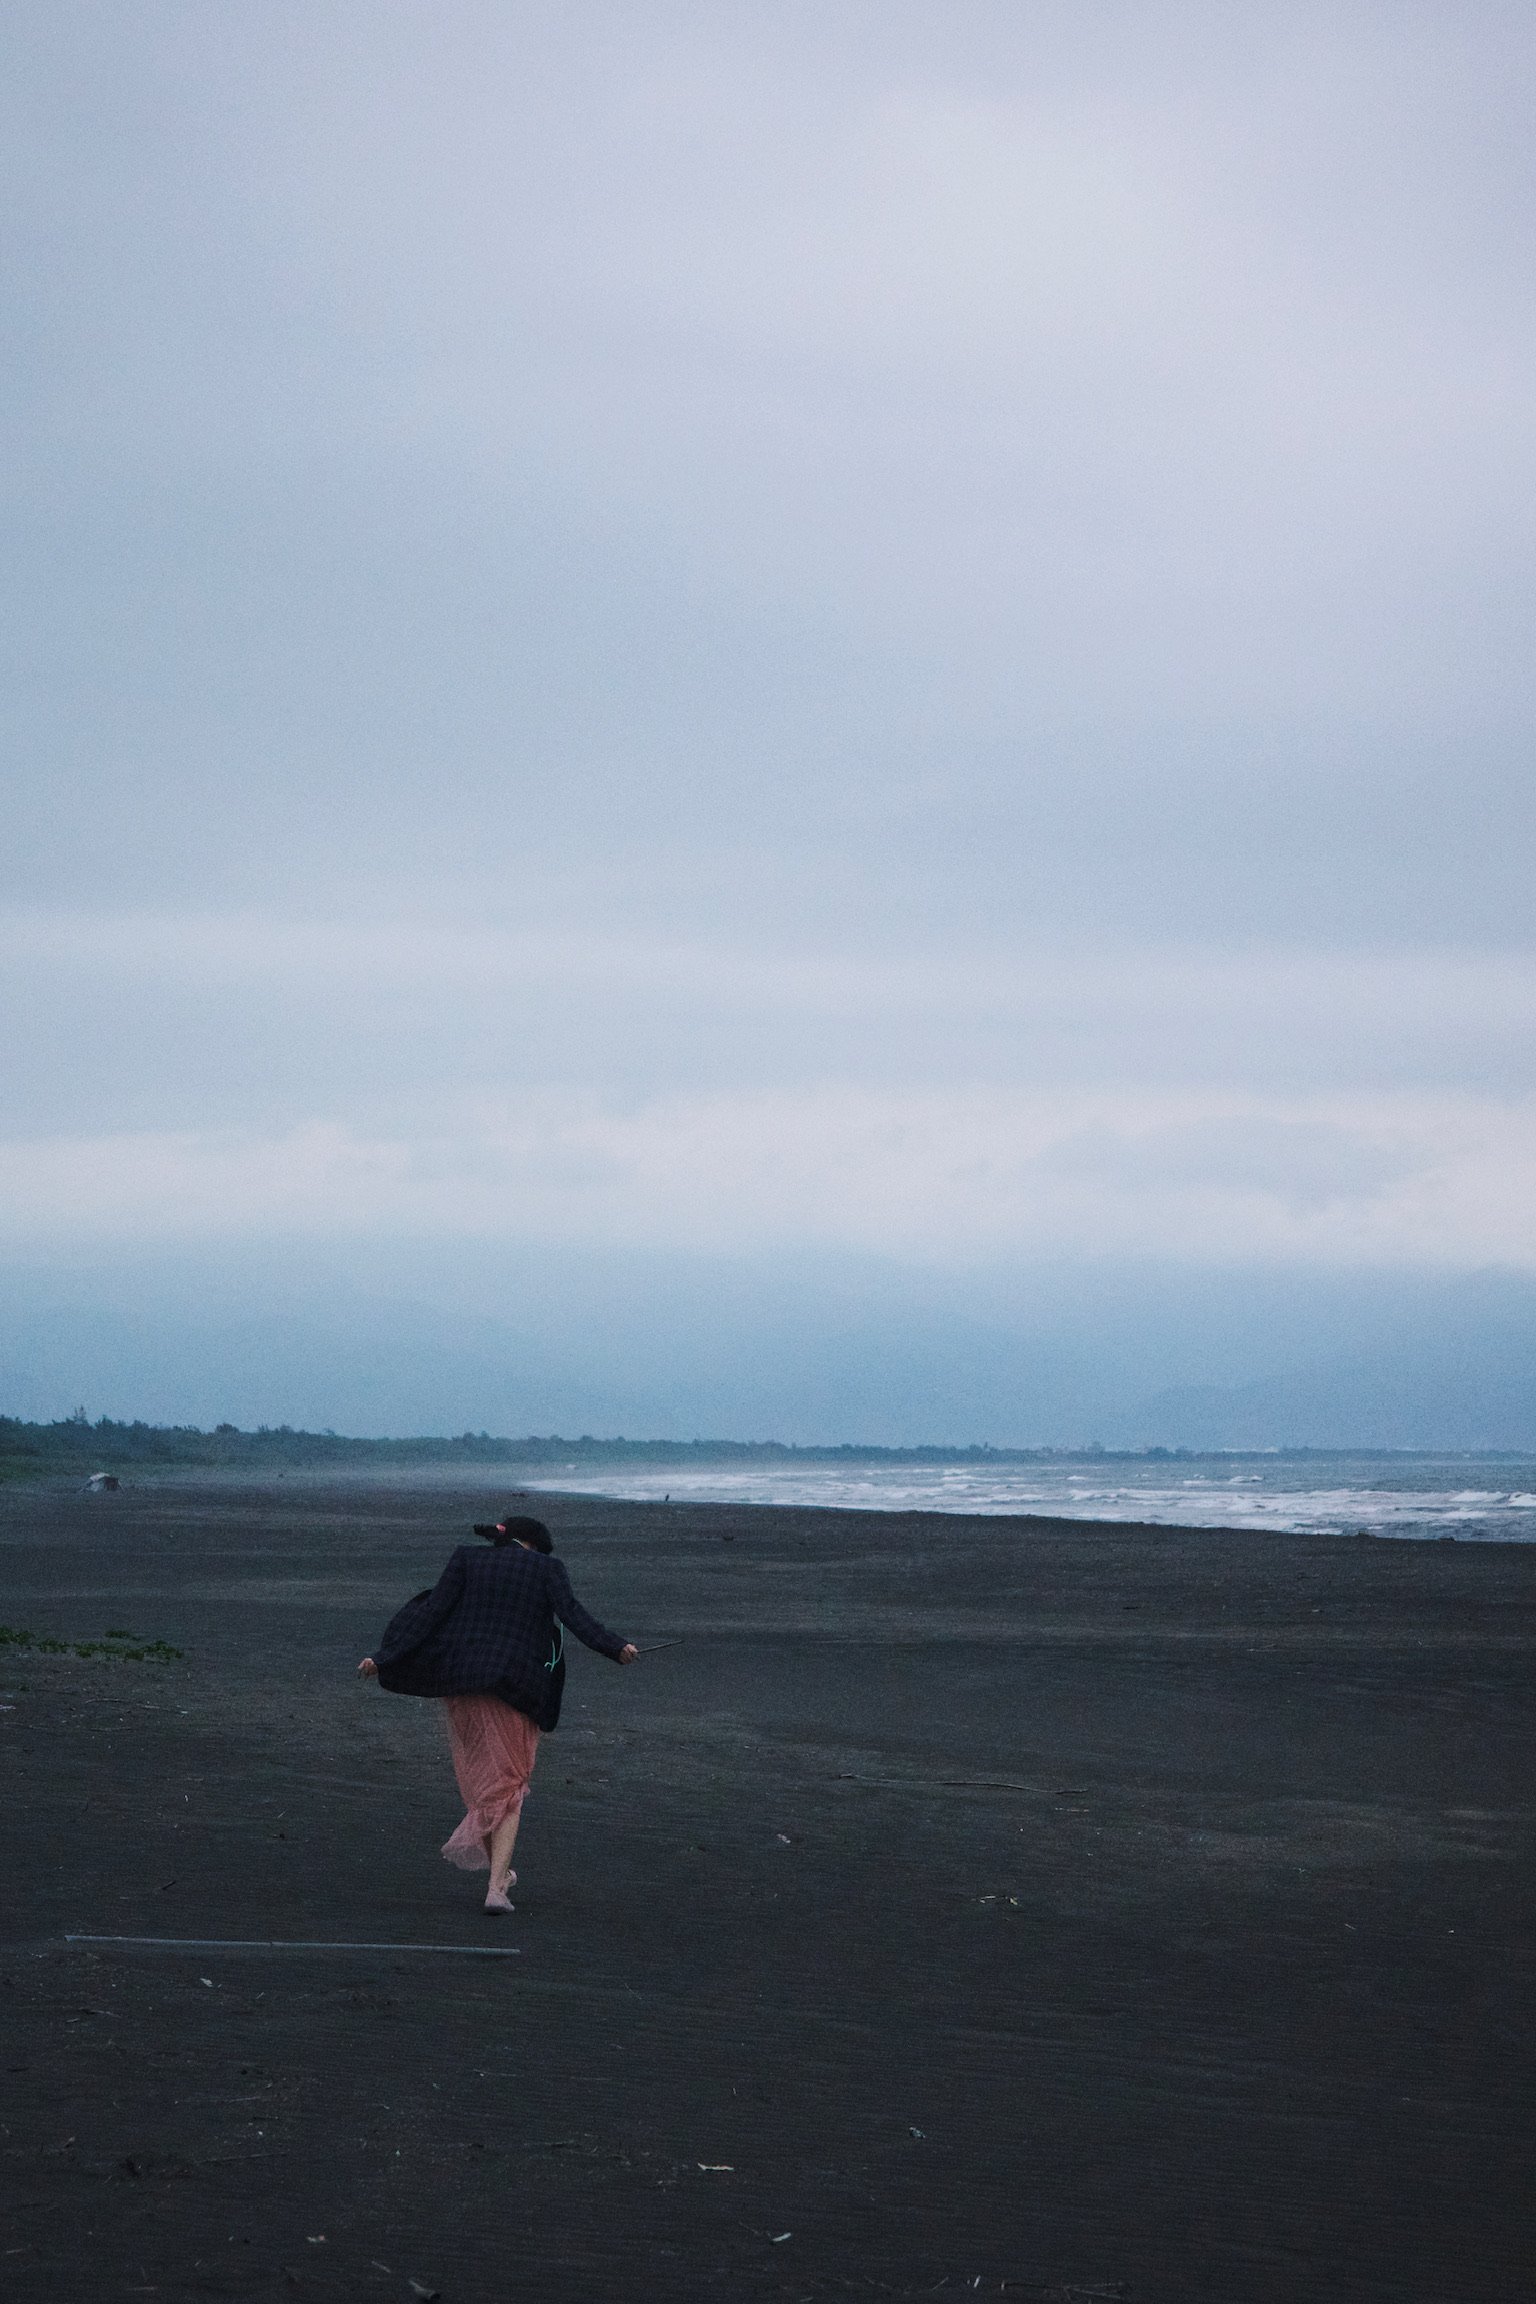 Woman wearing a pink dress and a blazer running on a gray beach on a cloudy day.